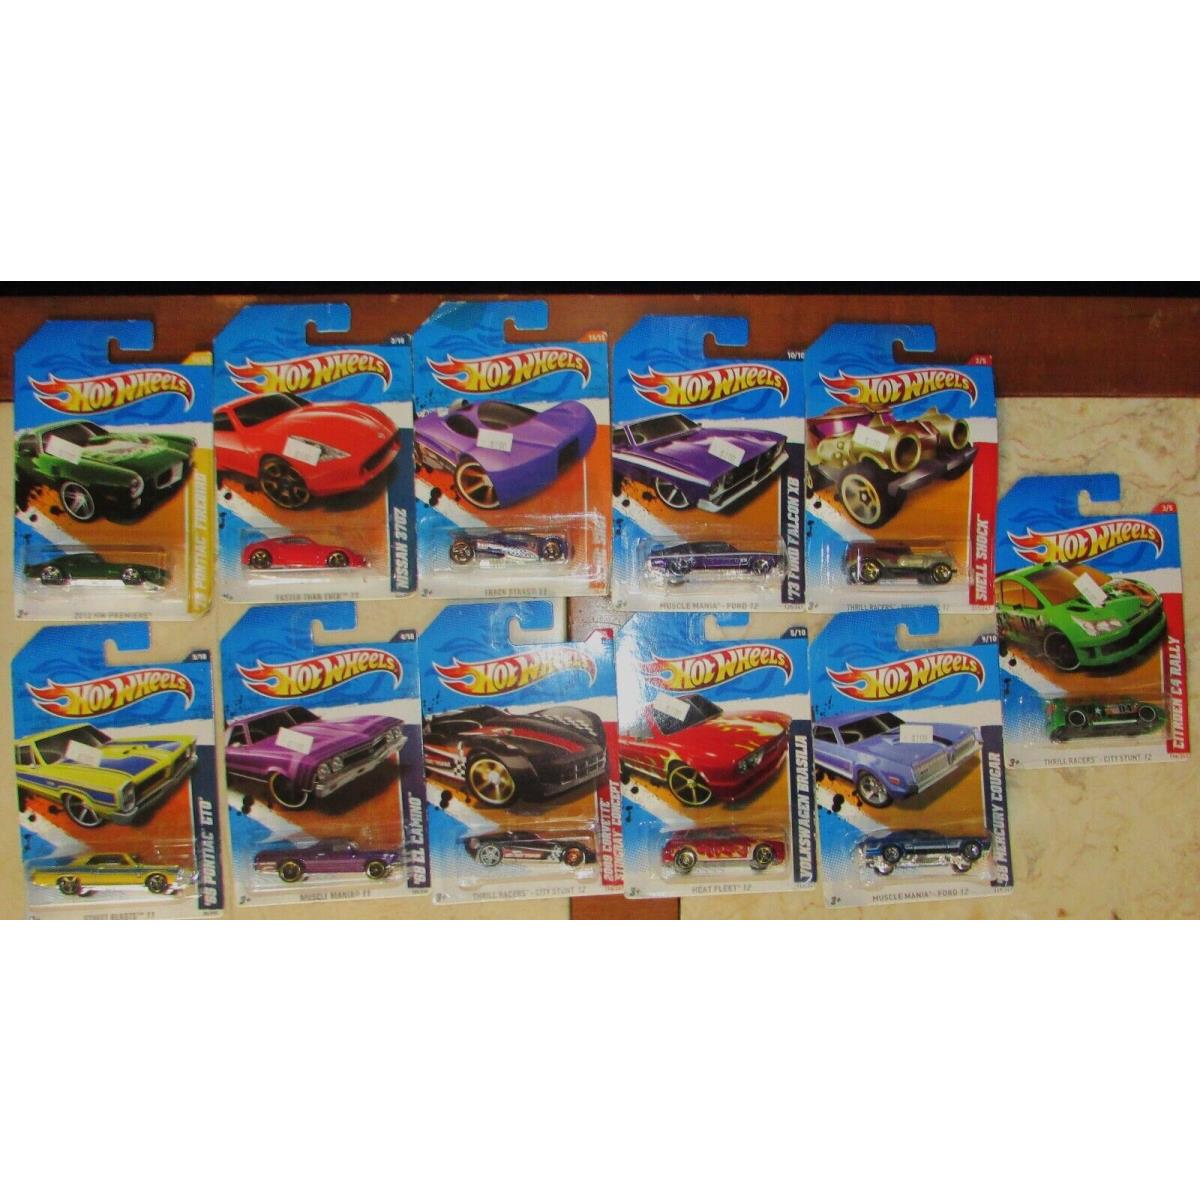 11 1/64 Hot Wheels Die Cast Cars 2010 2011 Manufacture IN Packages